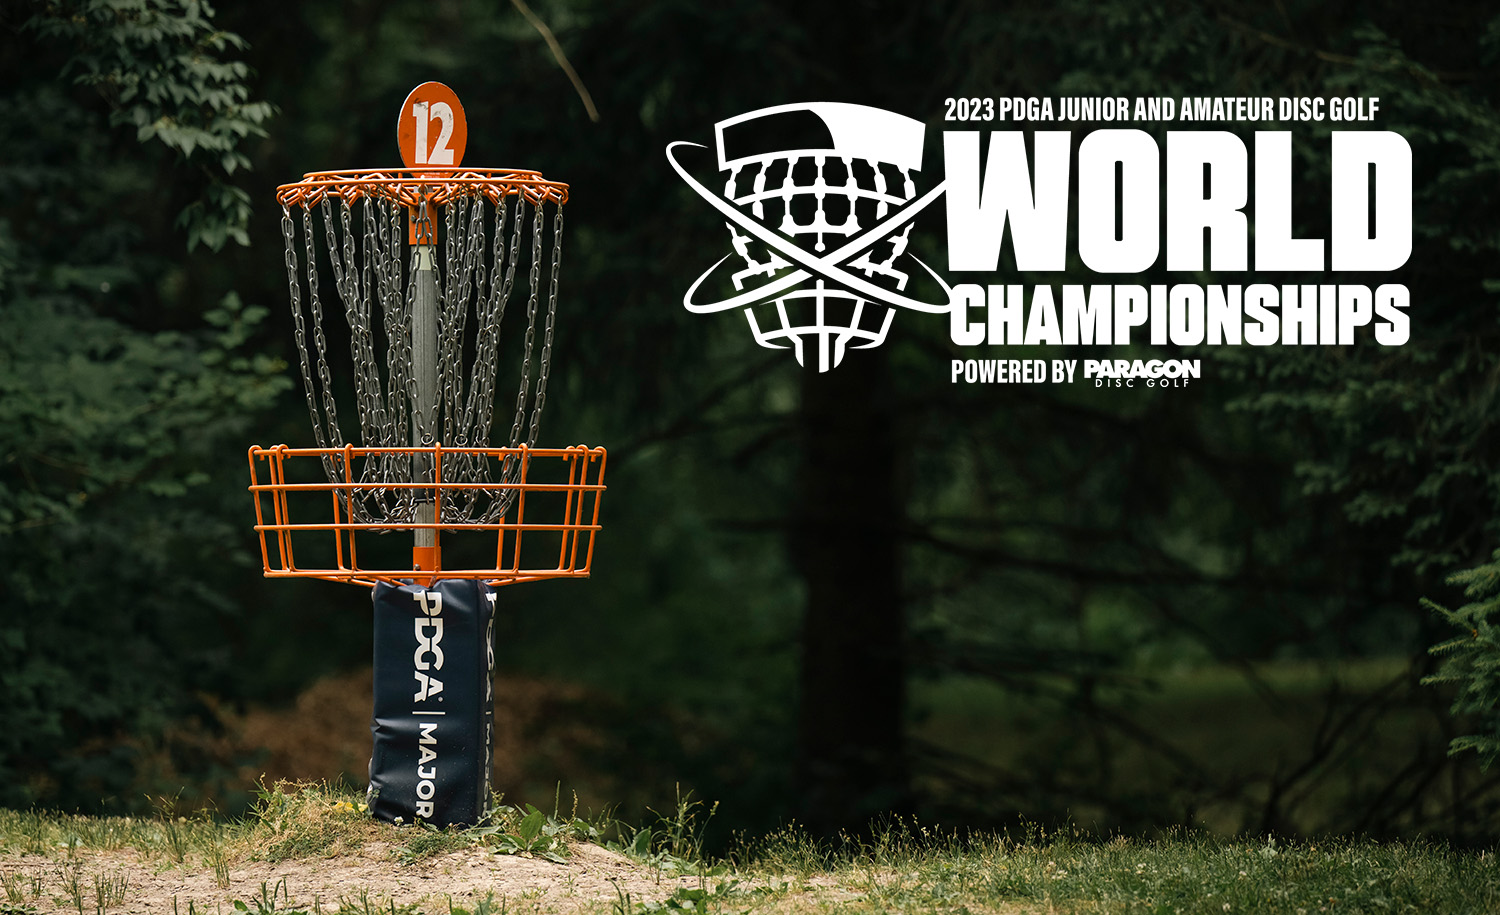 Schedule Change at Am and Junior Worlds Professional Disc Golf Association